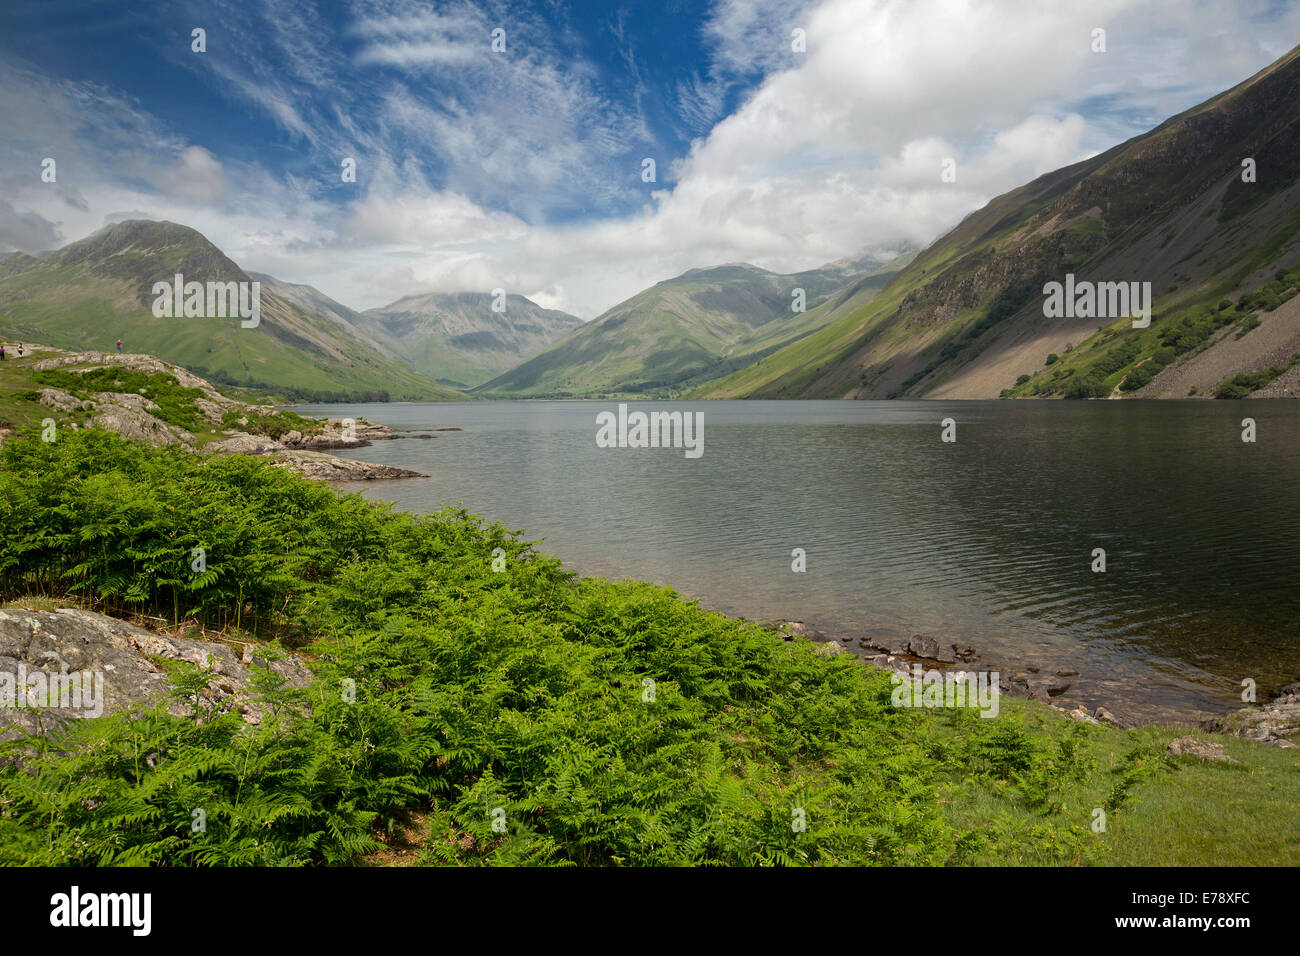 Wastwater lake surrounded by mountain peaks coated with green vegetation, blue sky with low cloud, Lake District Cumbria England Stock Photo